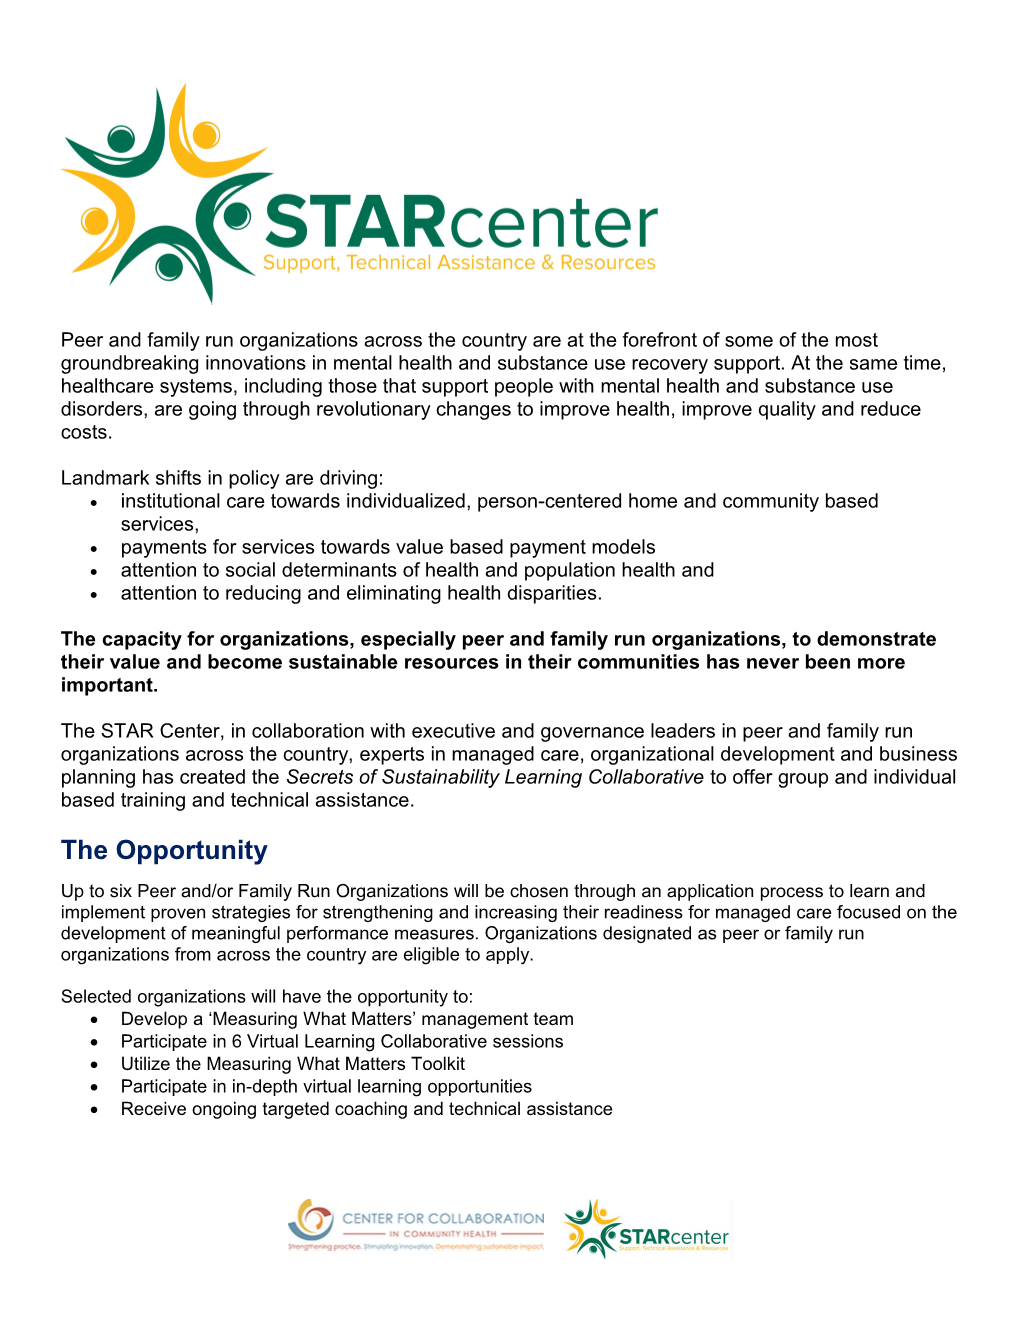 STAR Center Measuring What Matters Toolkit